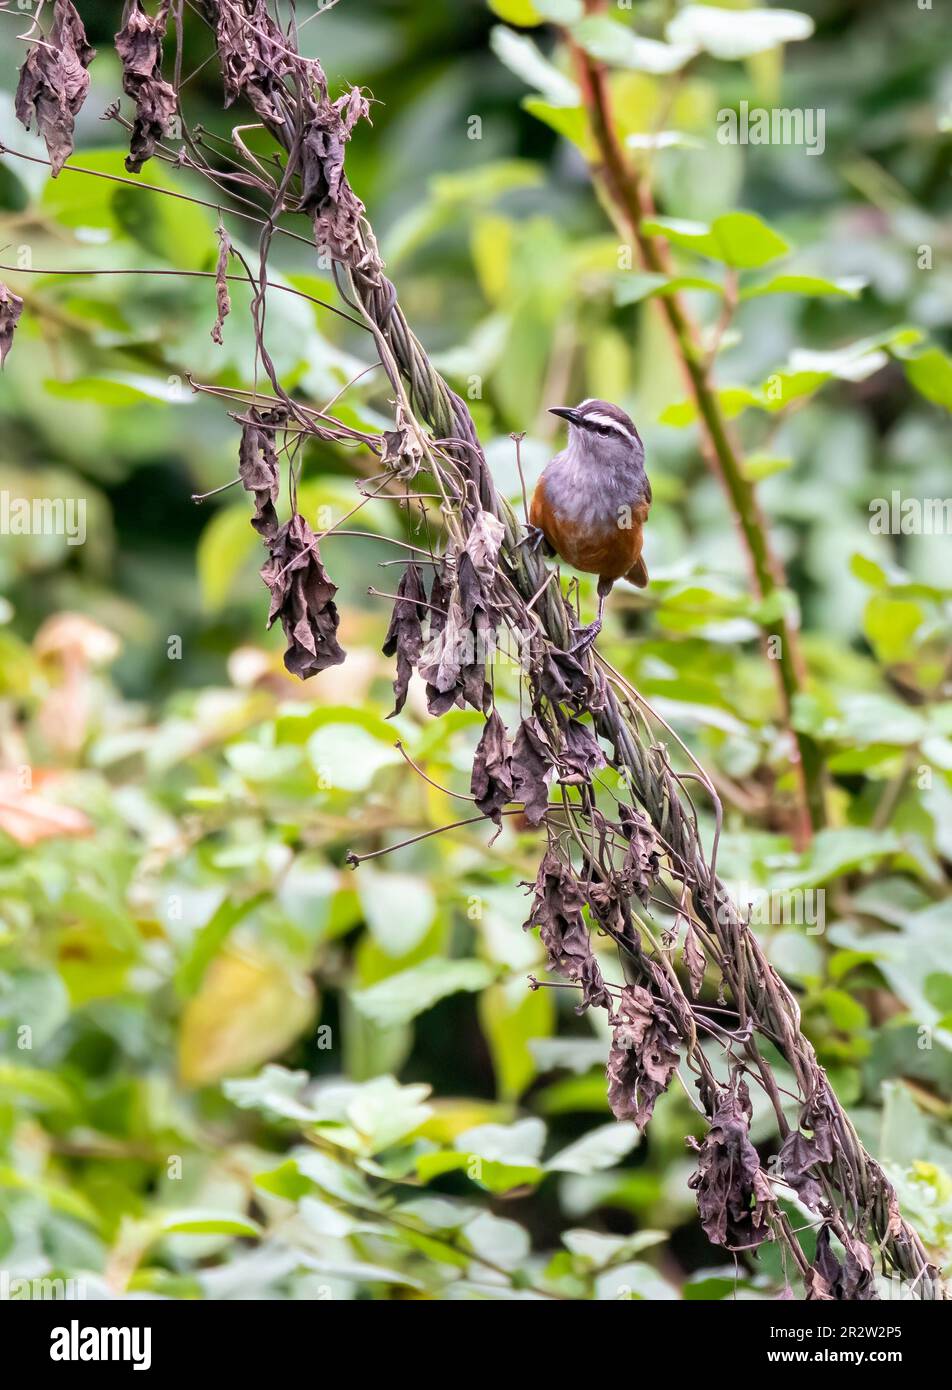 A Palani laughing thrush perched on a small twig on a roadside bush on the outskirts of Munnar city in Kerala Stock Photo